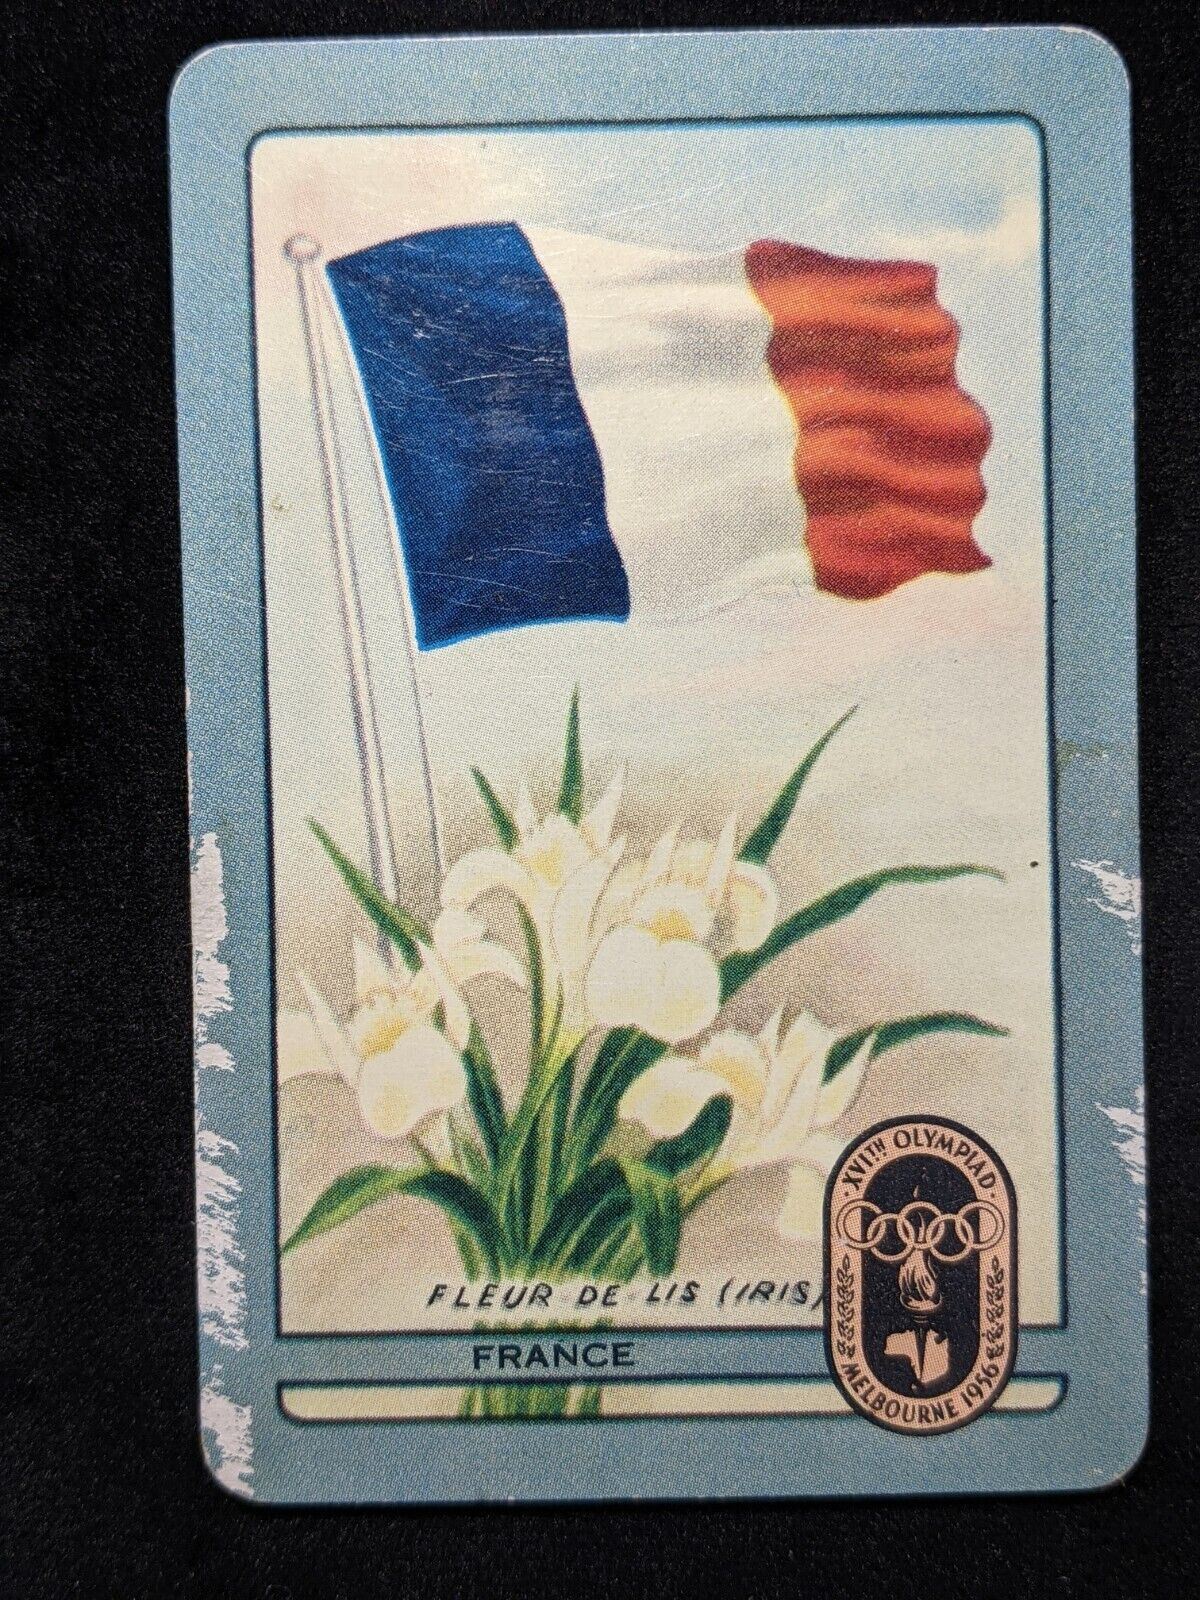 Coles Named Series Original 1950's 1956 Olympic Games Large Flag France #040